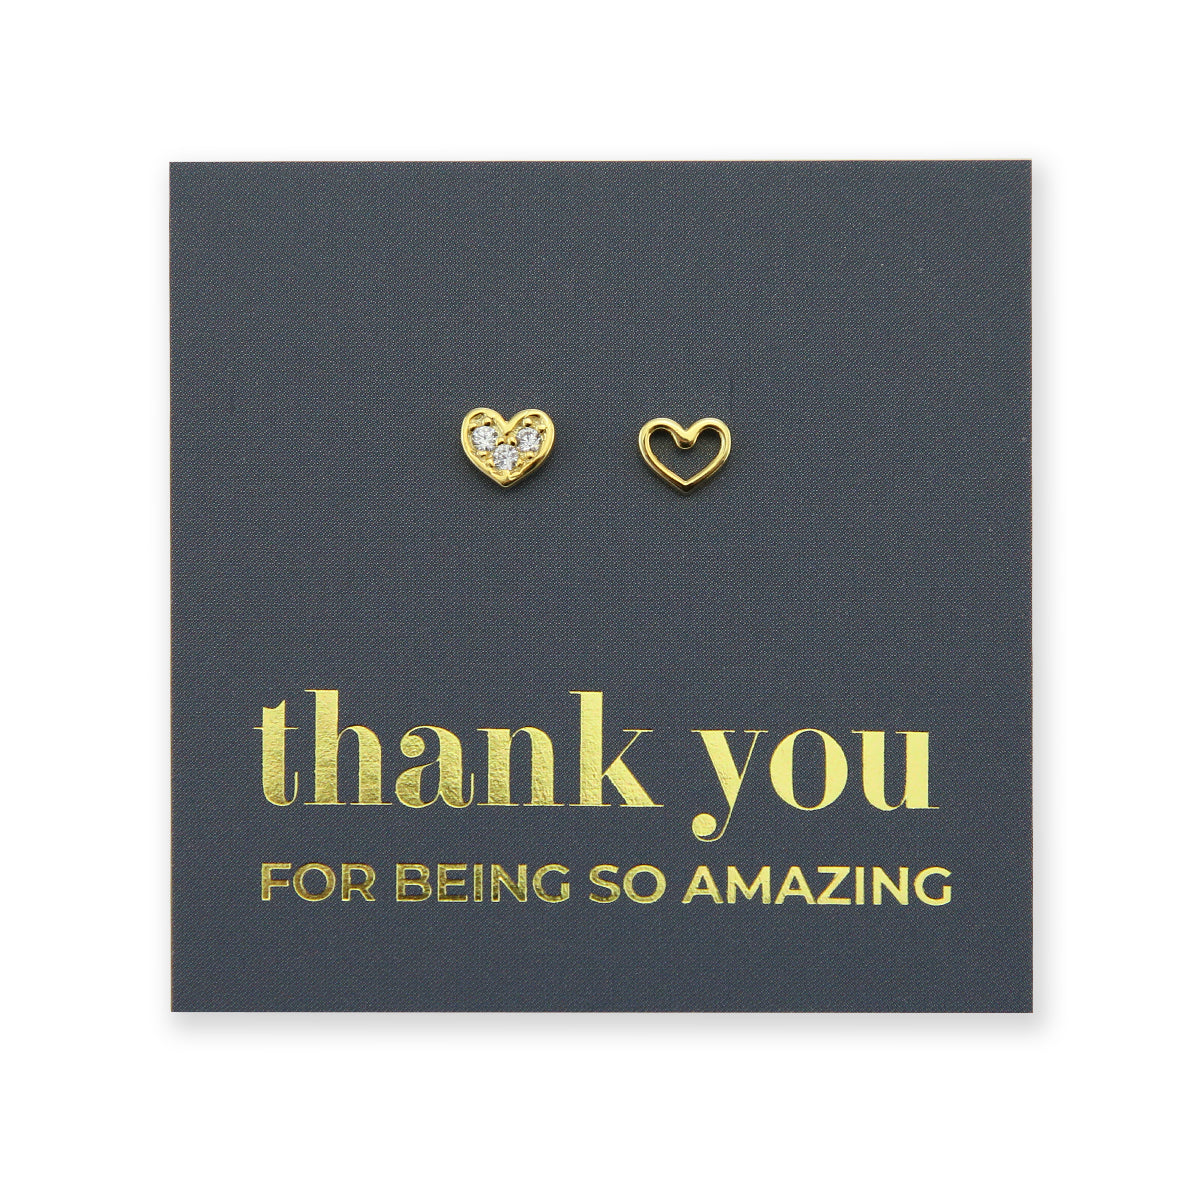 2 Hearts - Gold Sterling Silver Studs + CZ - Thank You For Being So Amazing (2407-R)